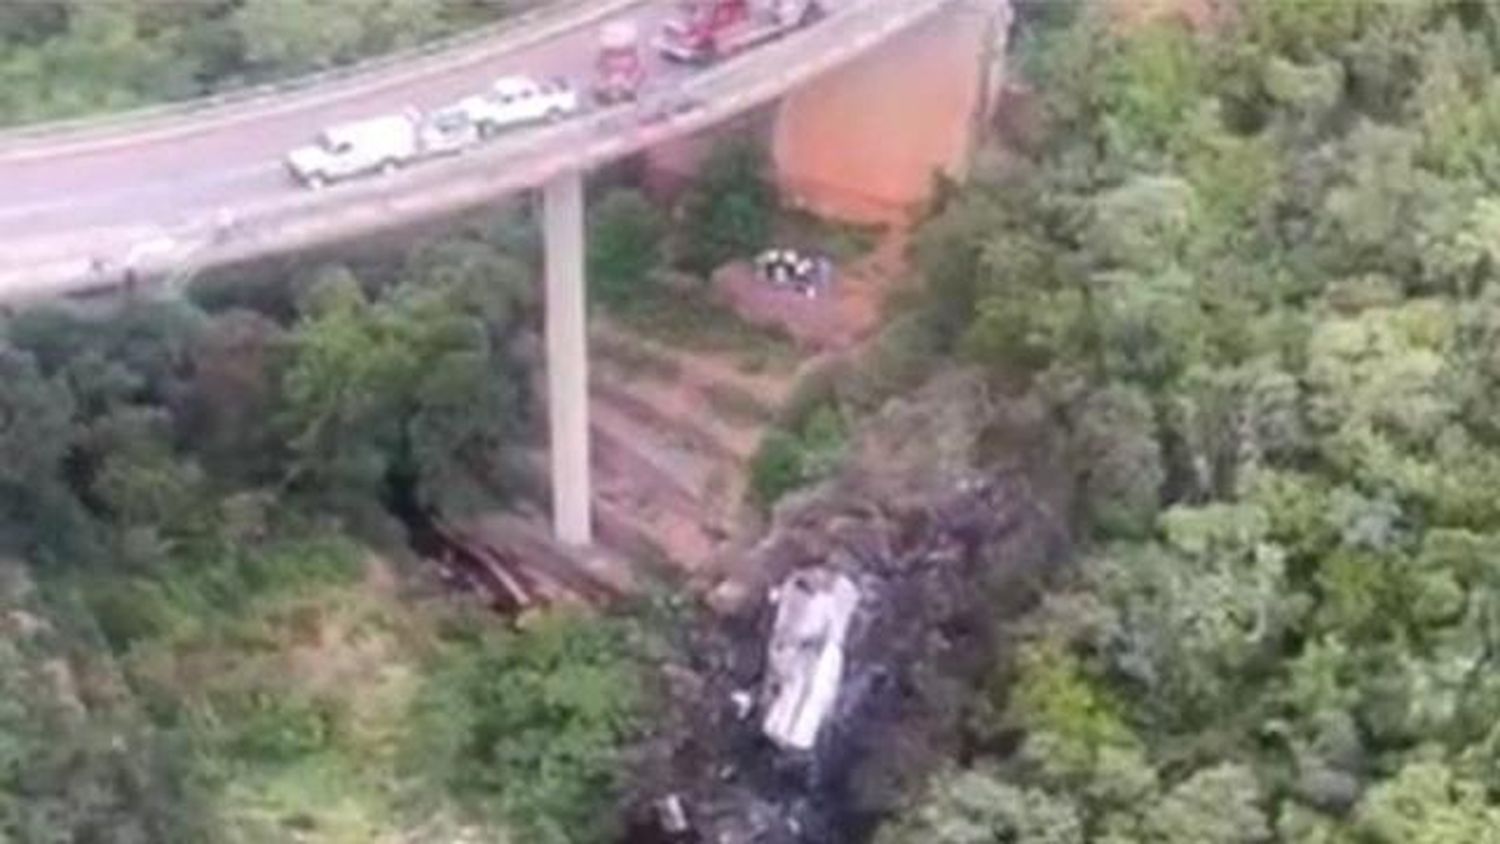 South Africa Bus Plunged off Bridge